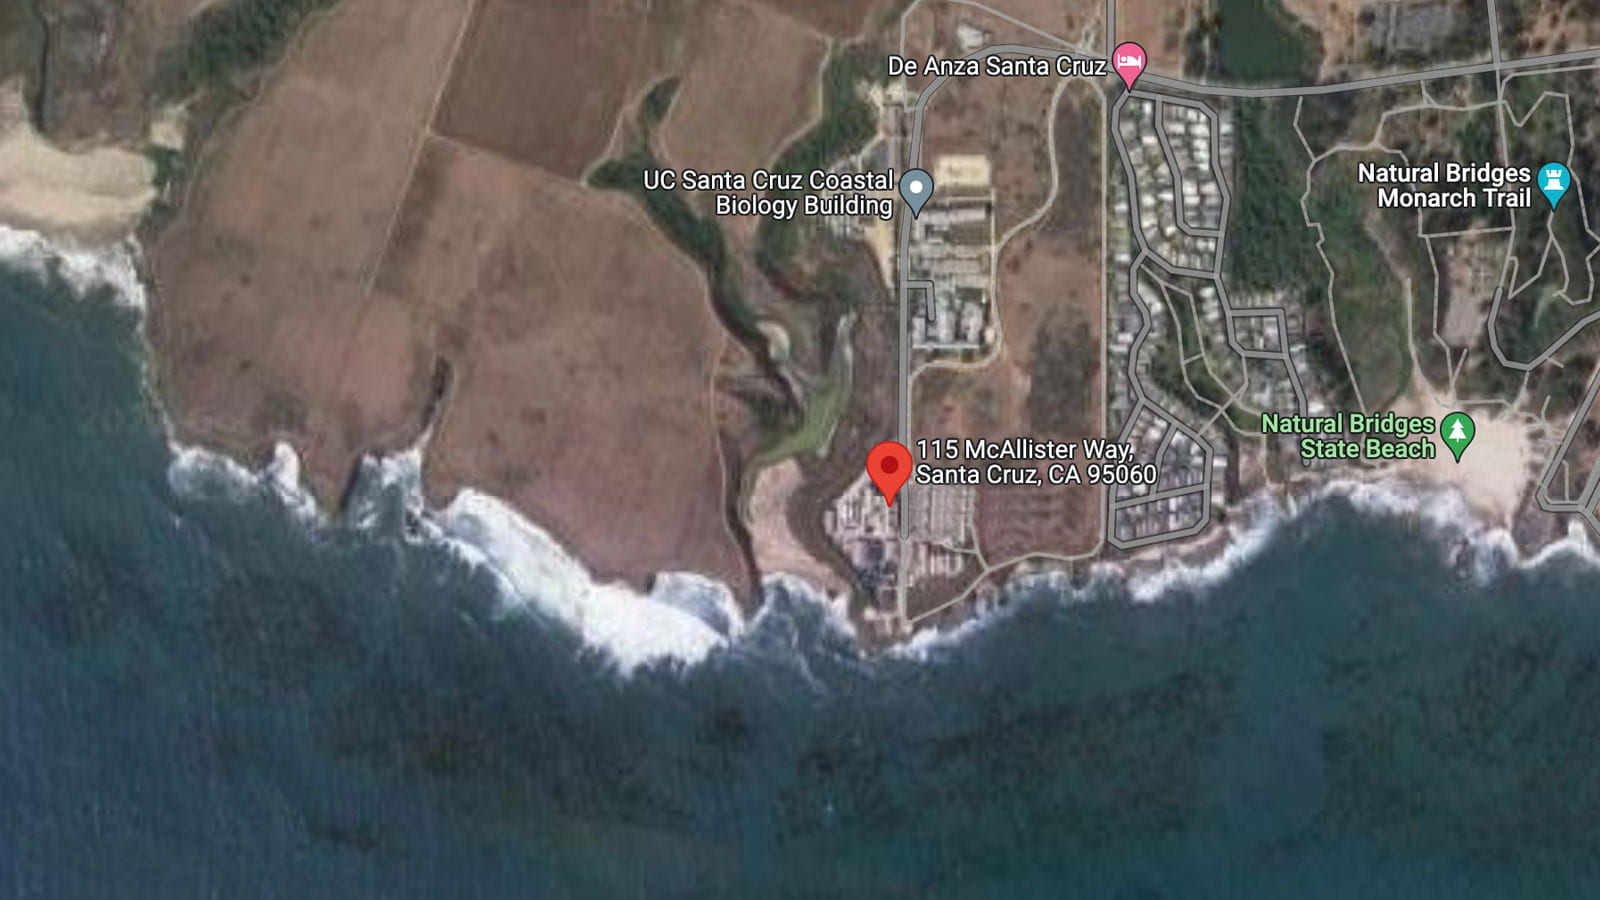 The Coastal Science and Policy Program Location